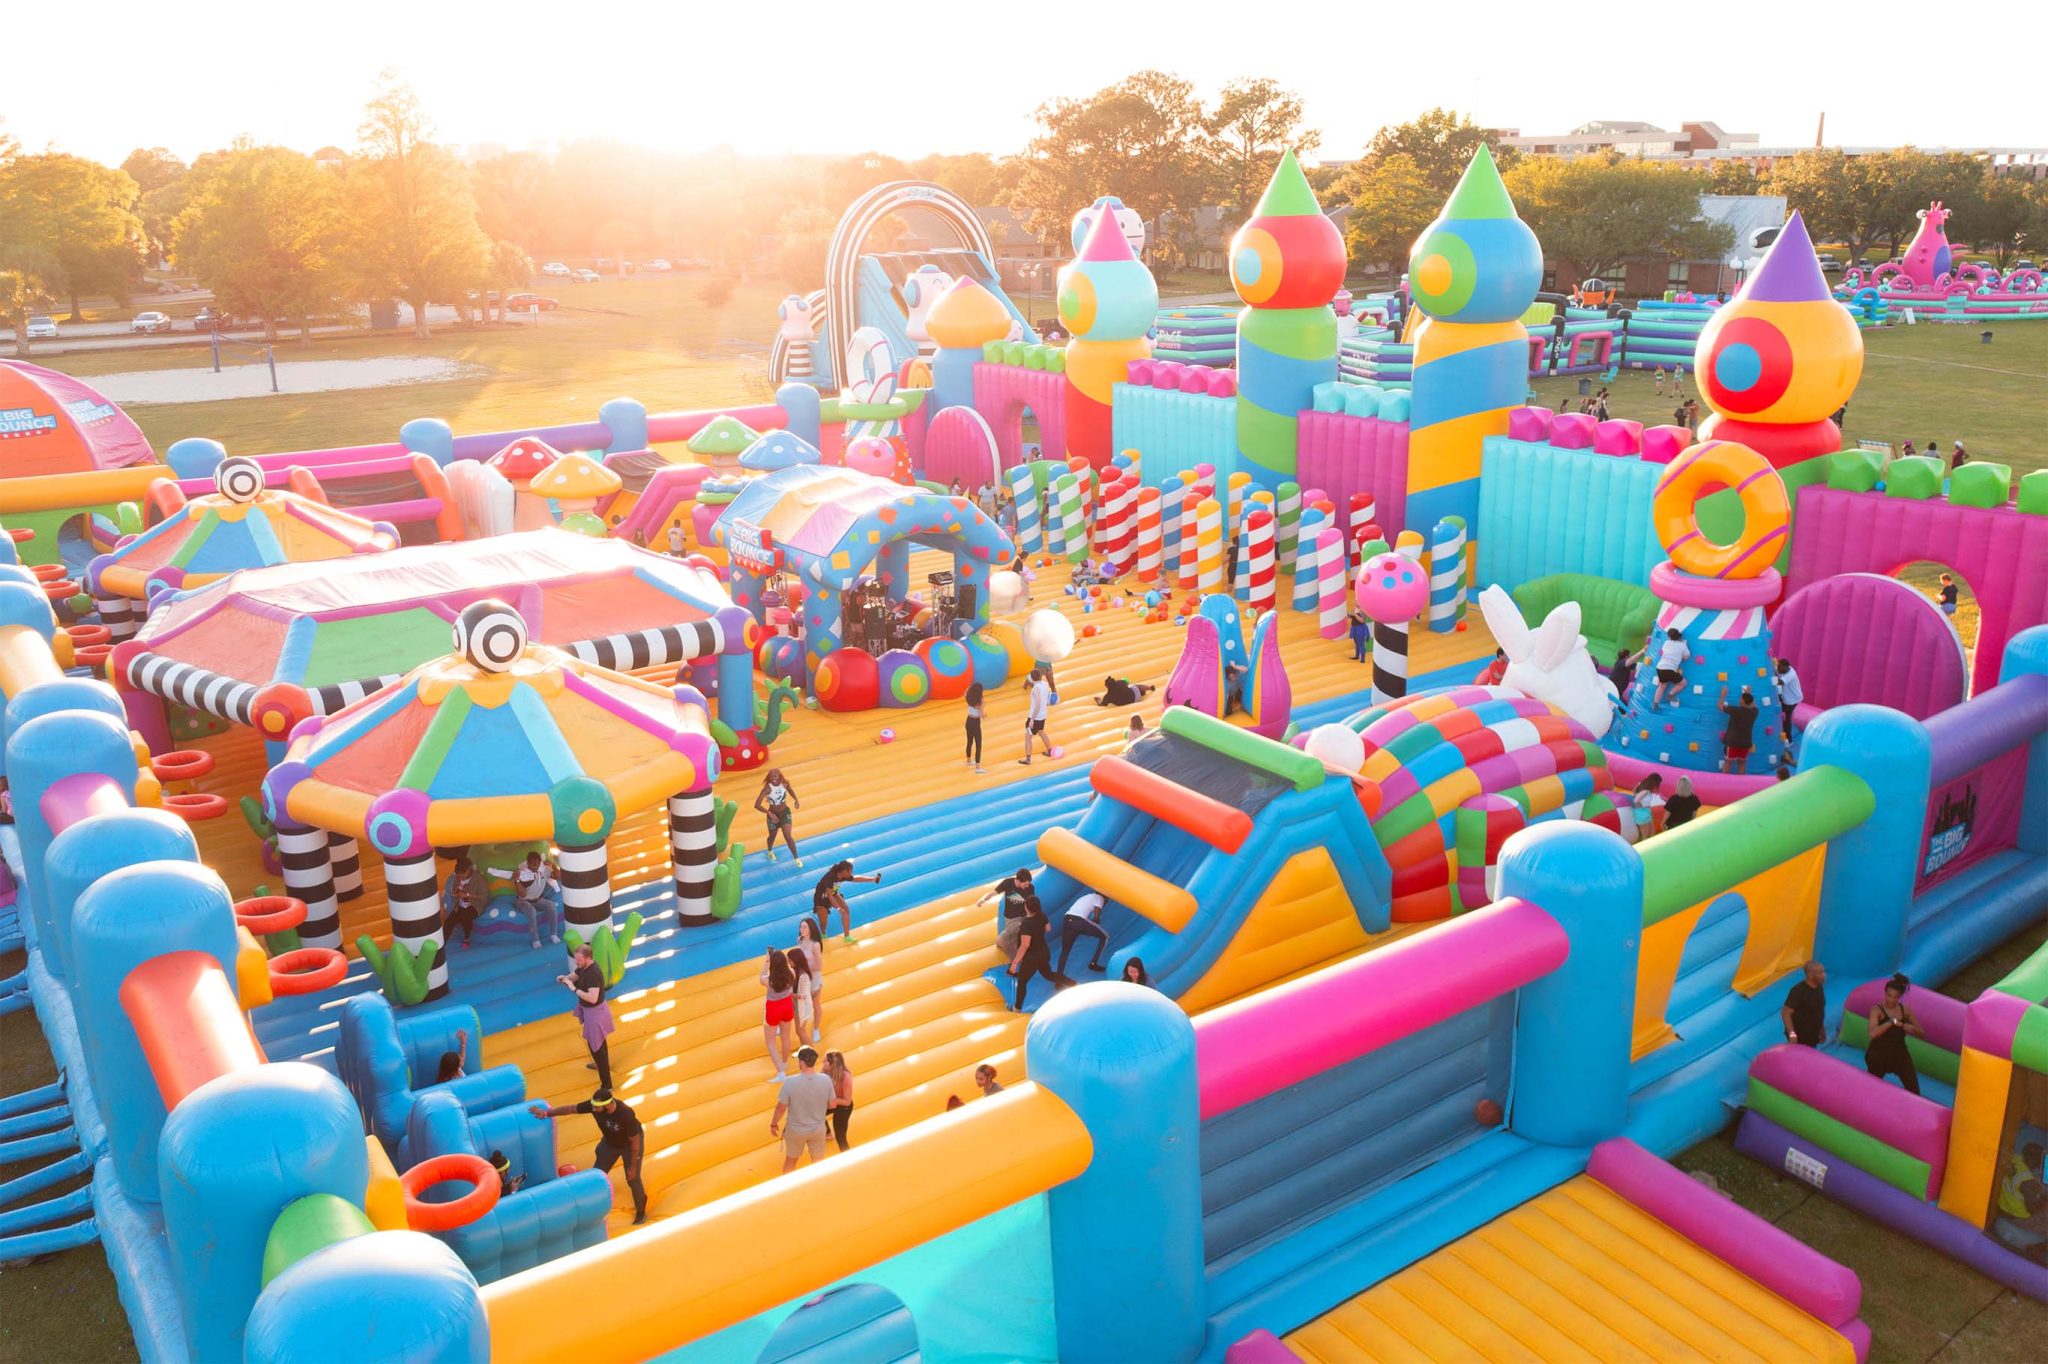 10 Super Fun Party Activities For Kids This Summer - Jump City